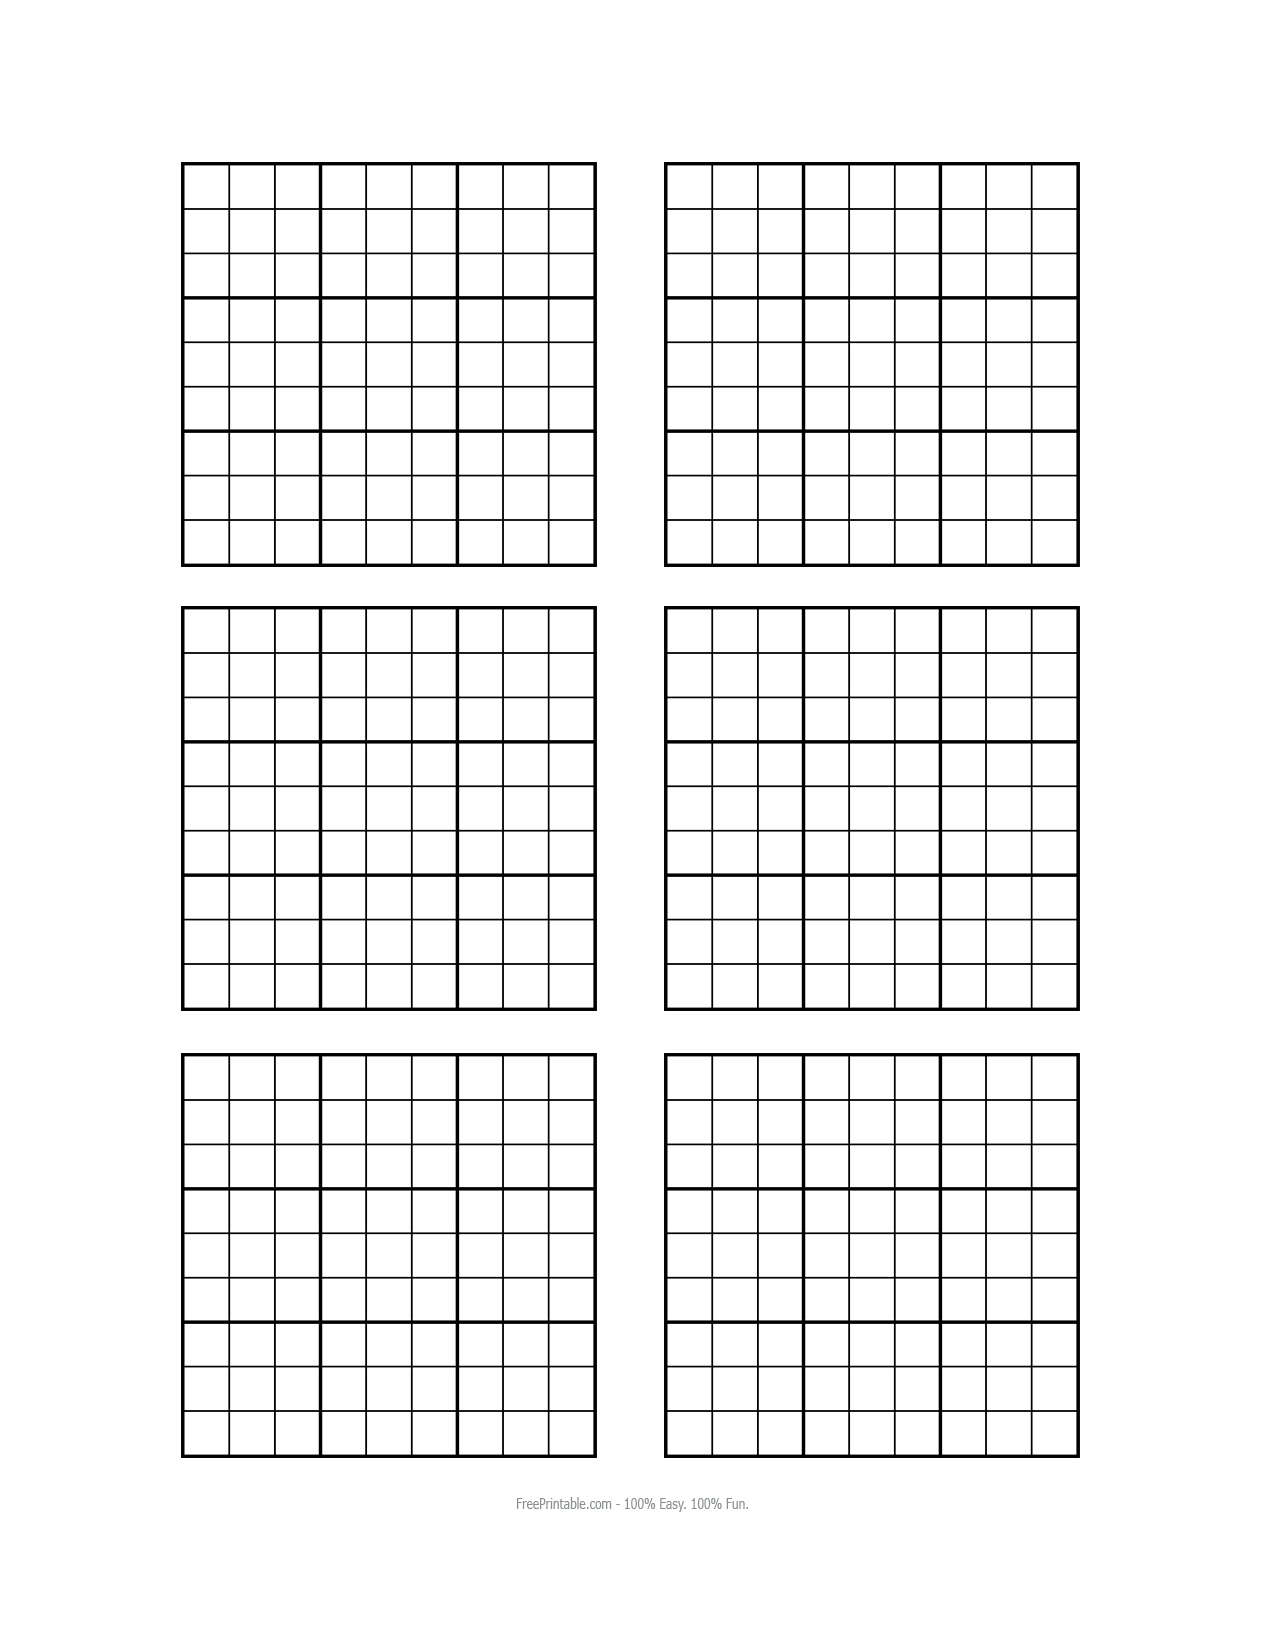 search-results-for-sudoku-blank-page-to-print-calendar-2015